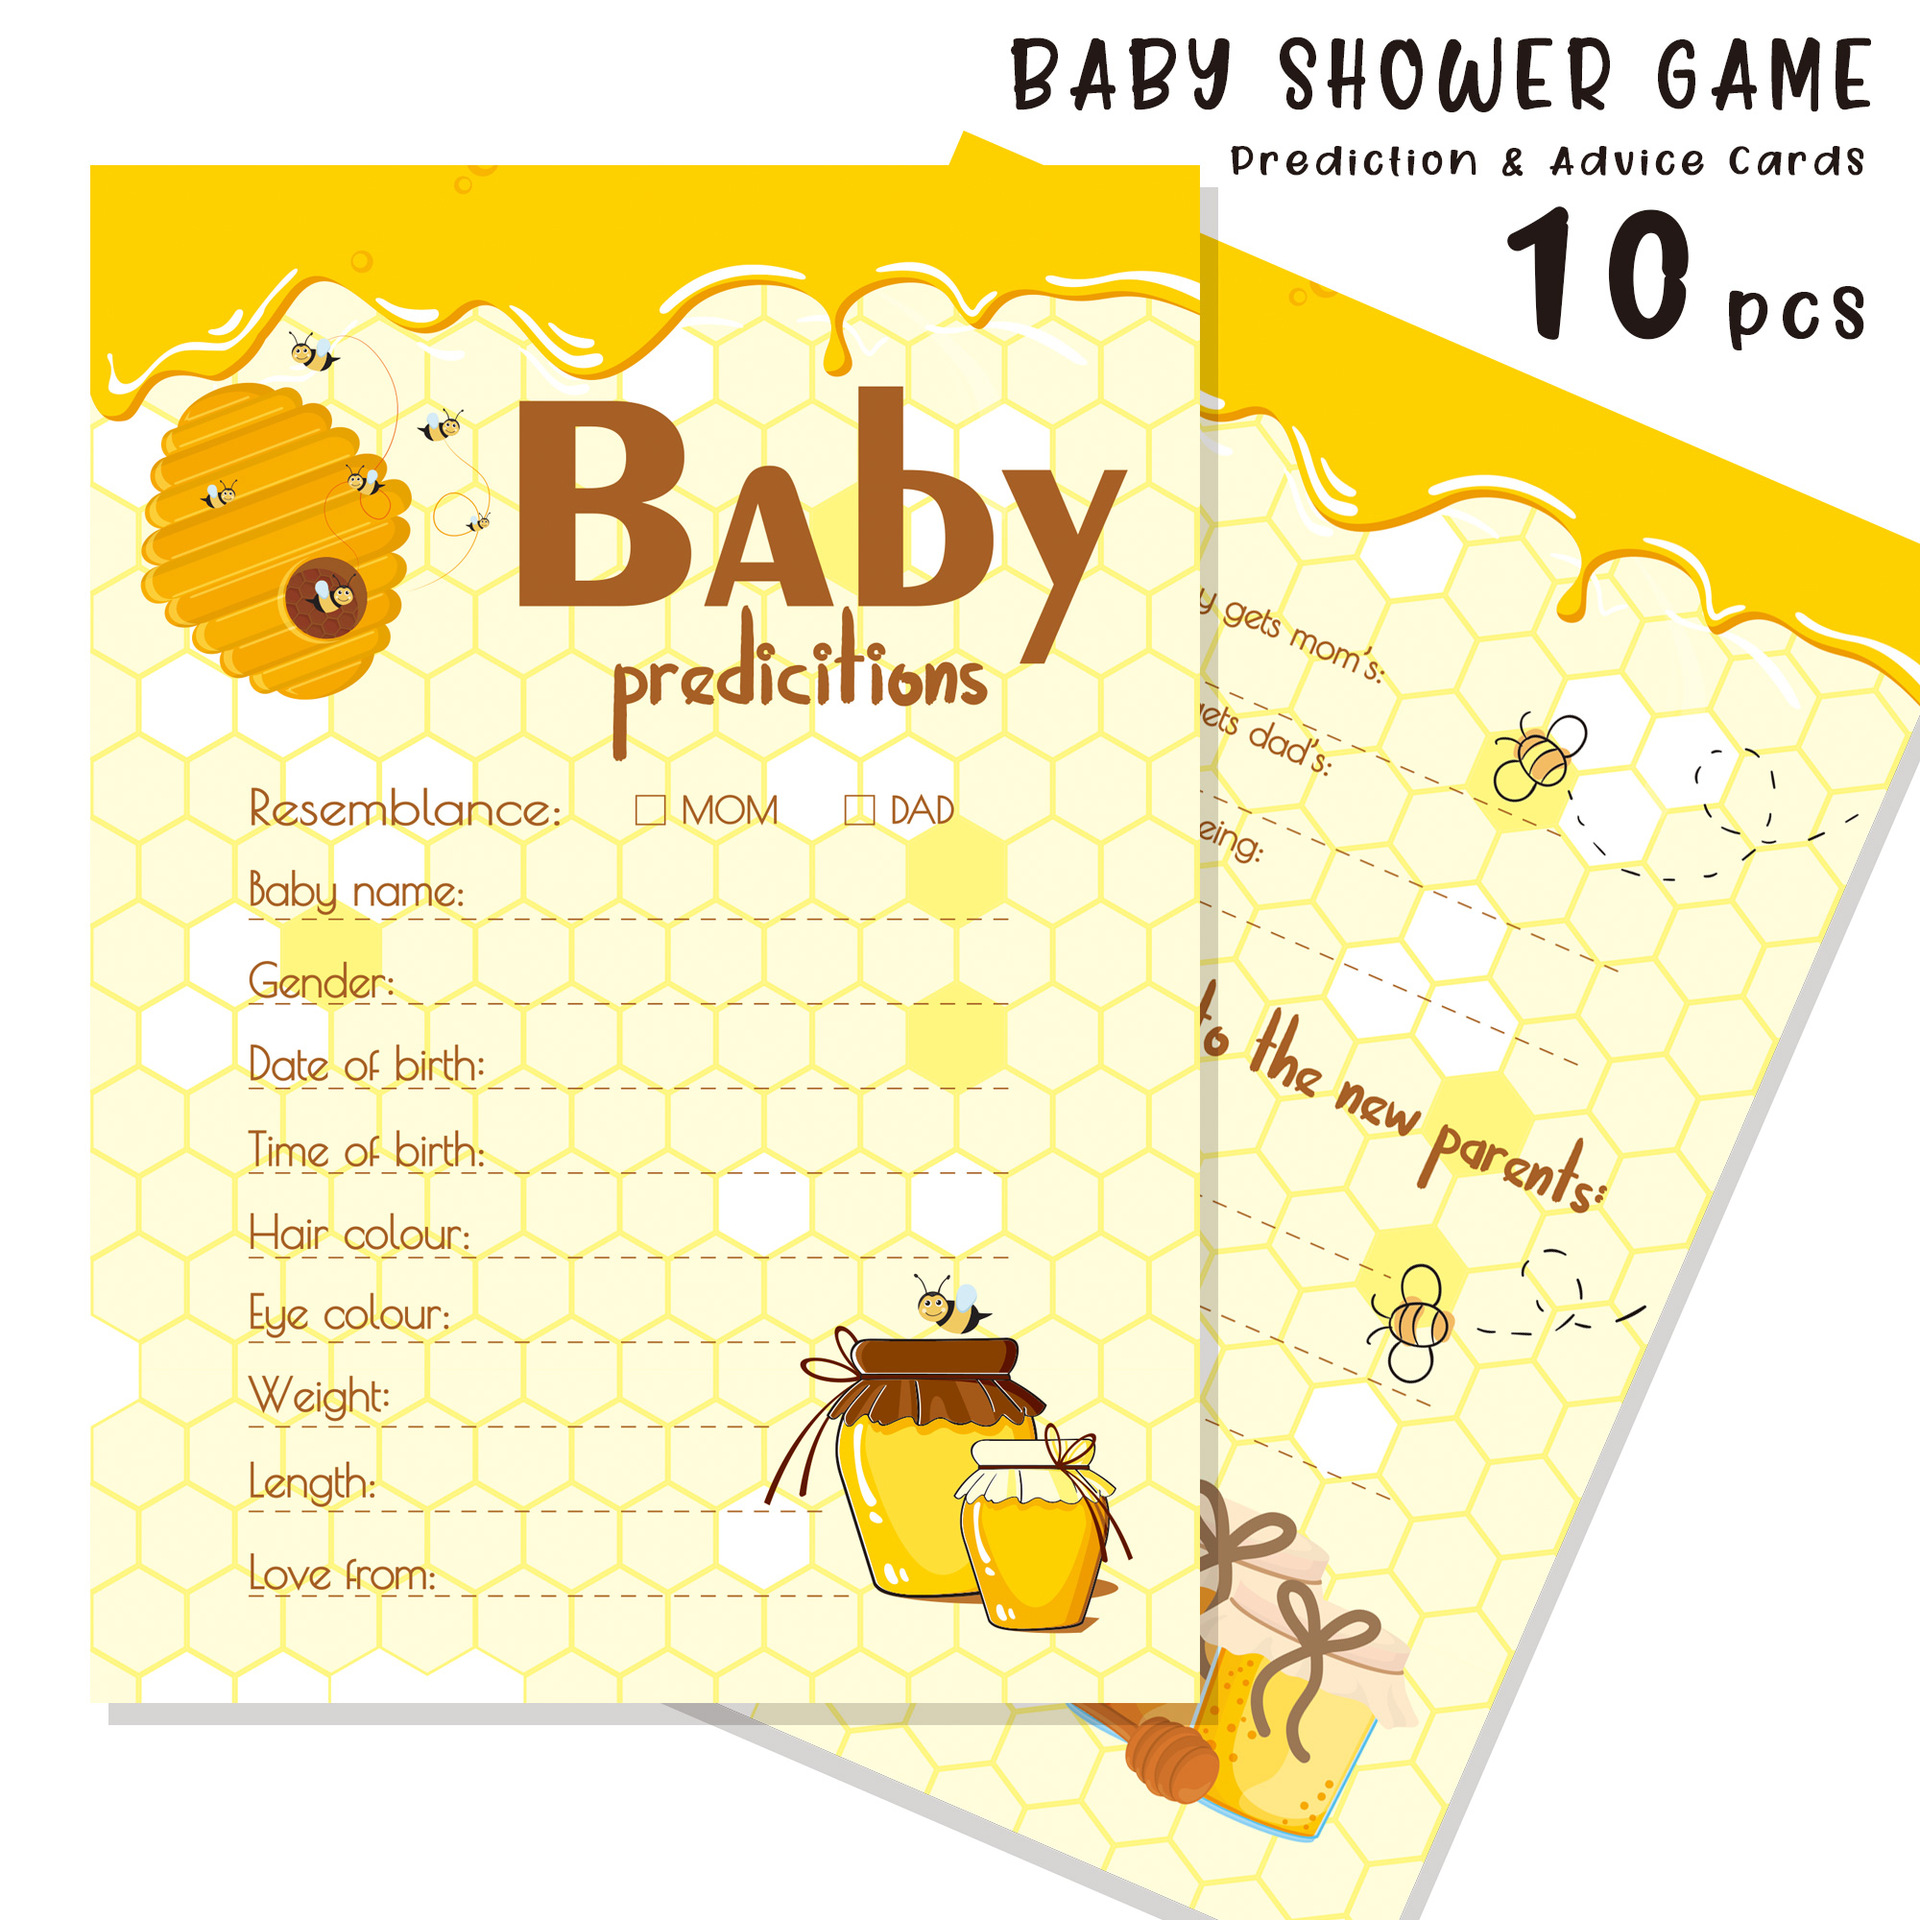 Baby Shower Predicitions And Advice Card Pack of 10